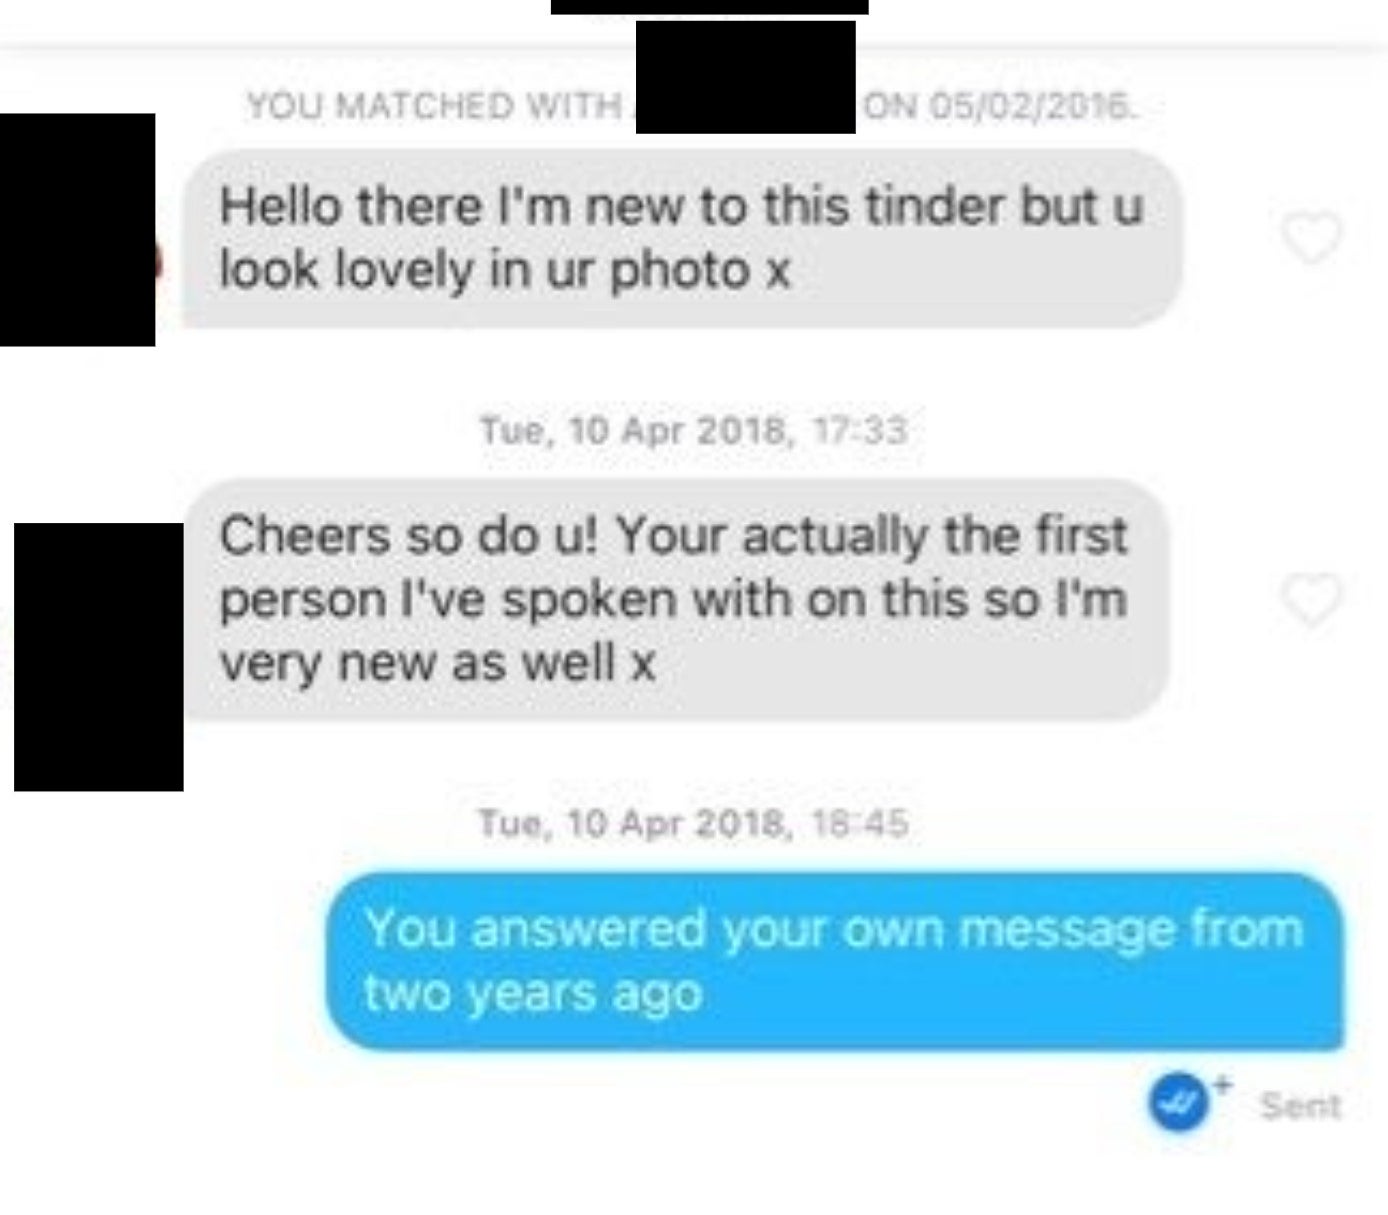 A guy answering his own tinder messages from two years ago